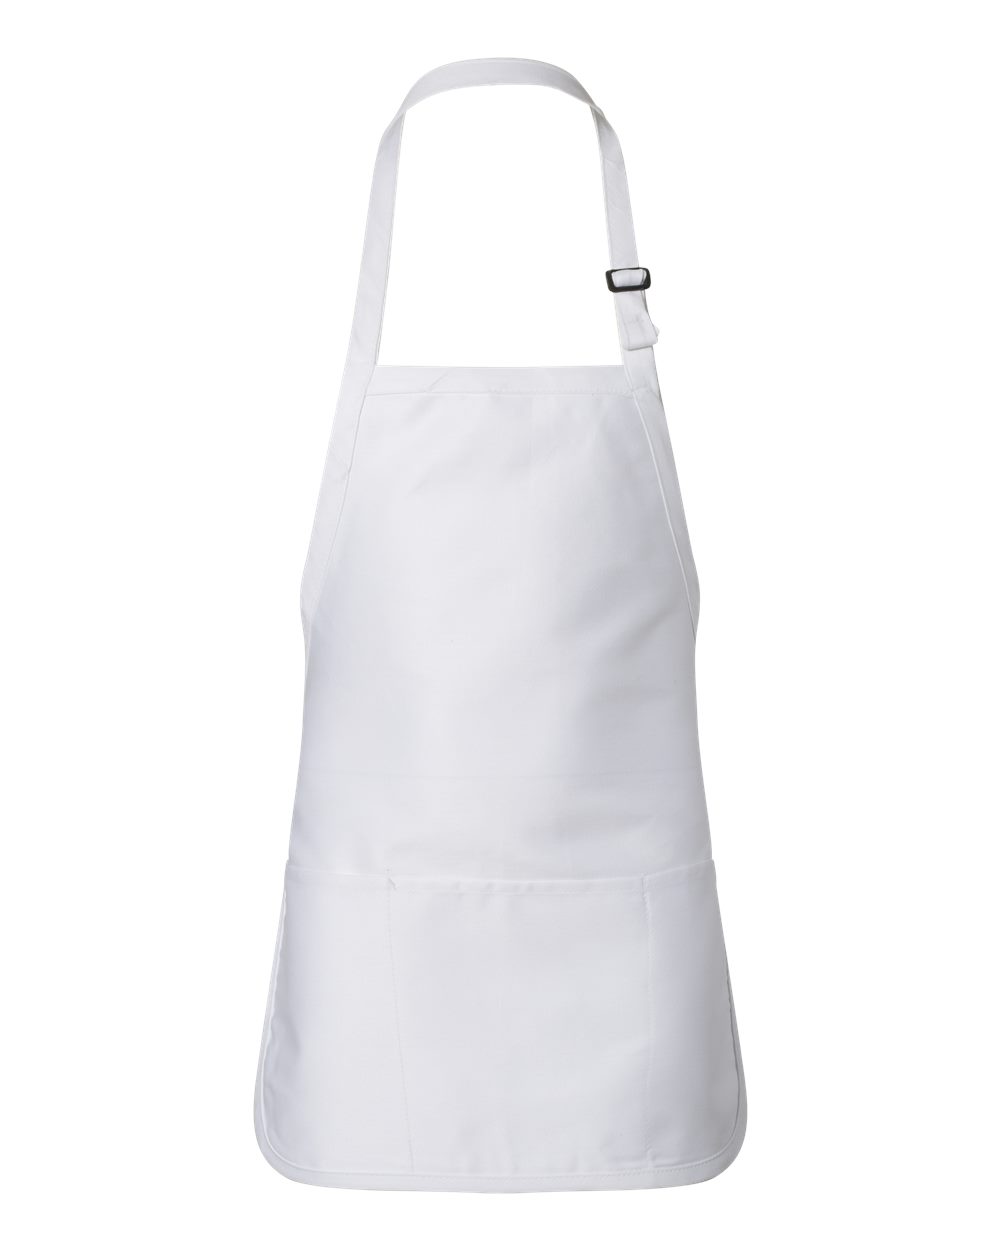 Full-Length Apron with Pouch Pocket-